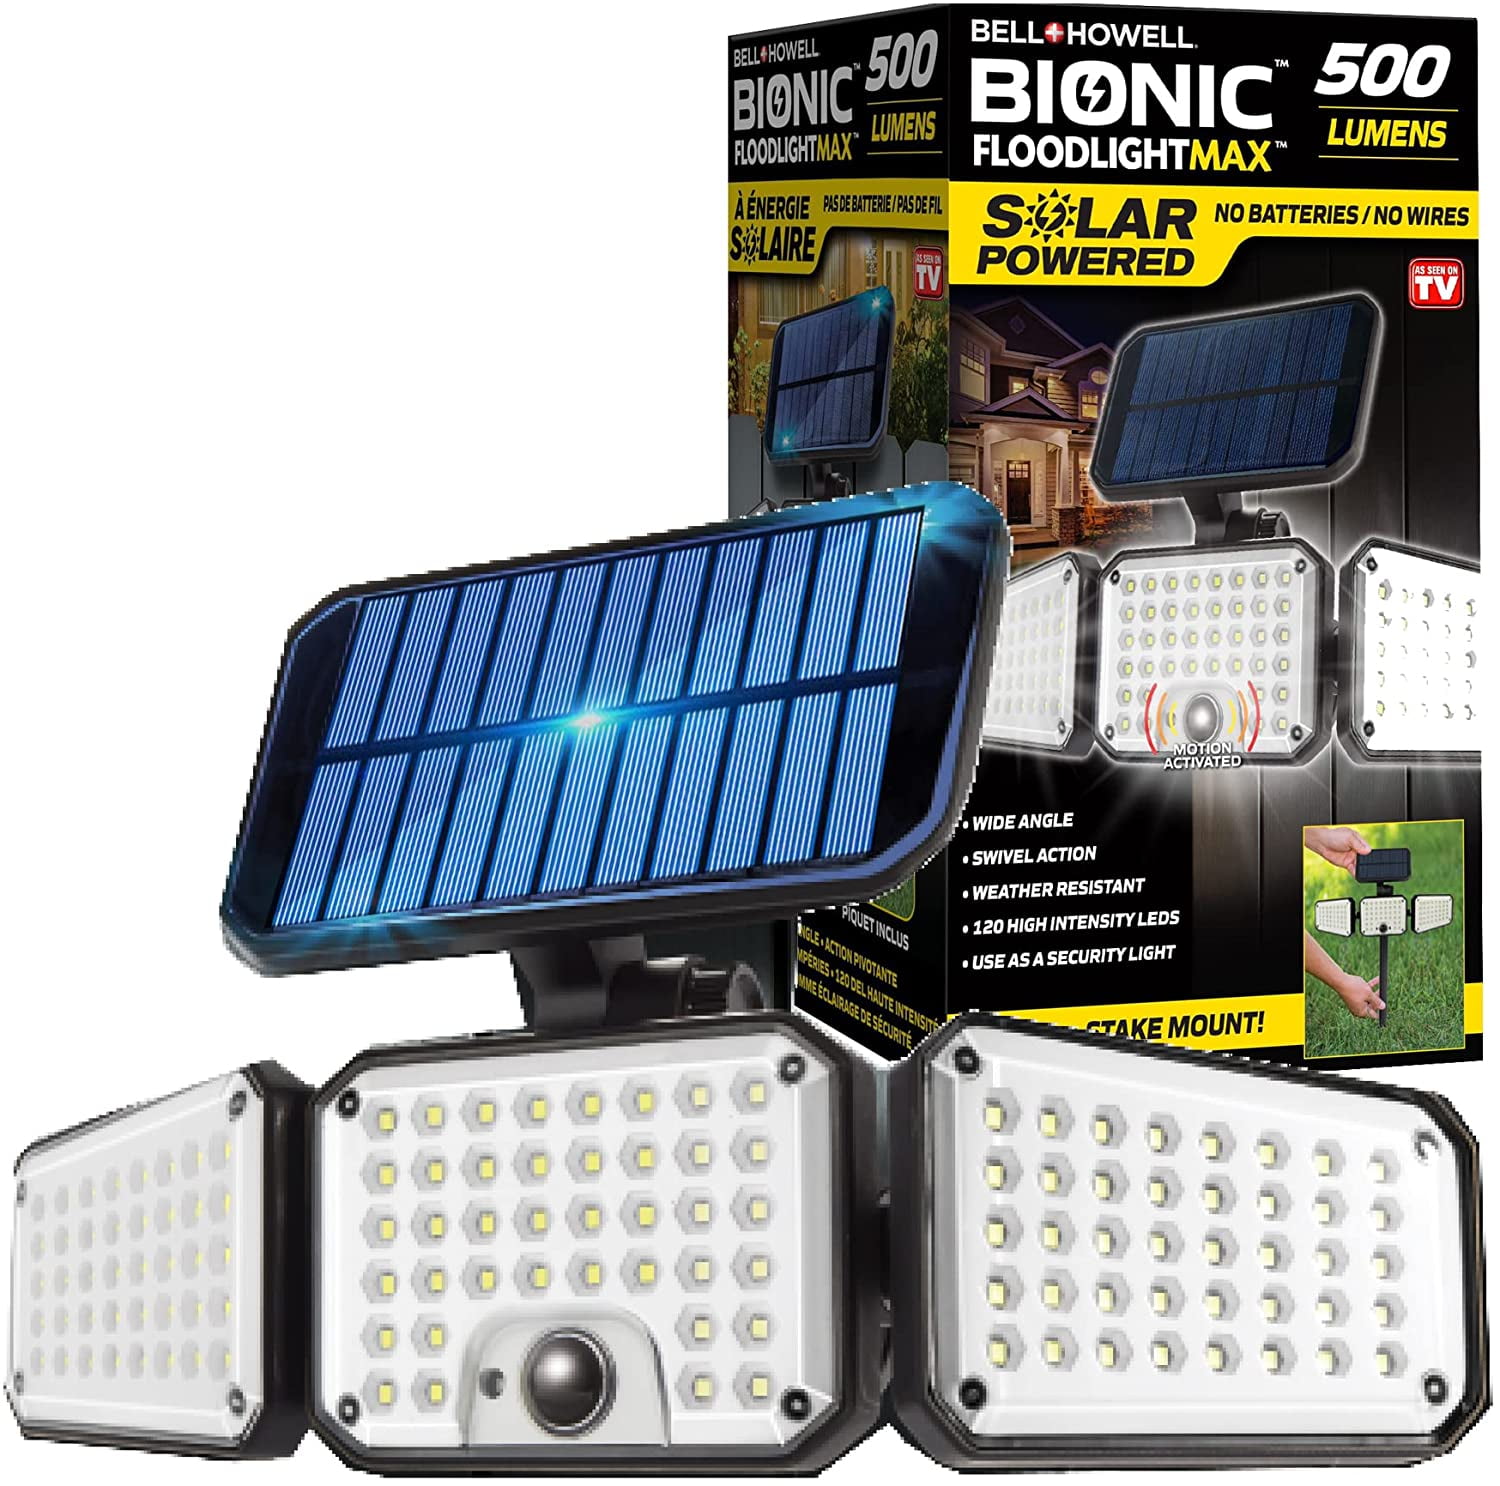 Bell+Howell Bionic Floodlight Max, Solar Powered LED Light, Motion activated, High Intensity LED